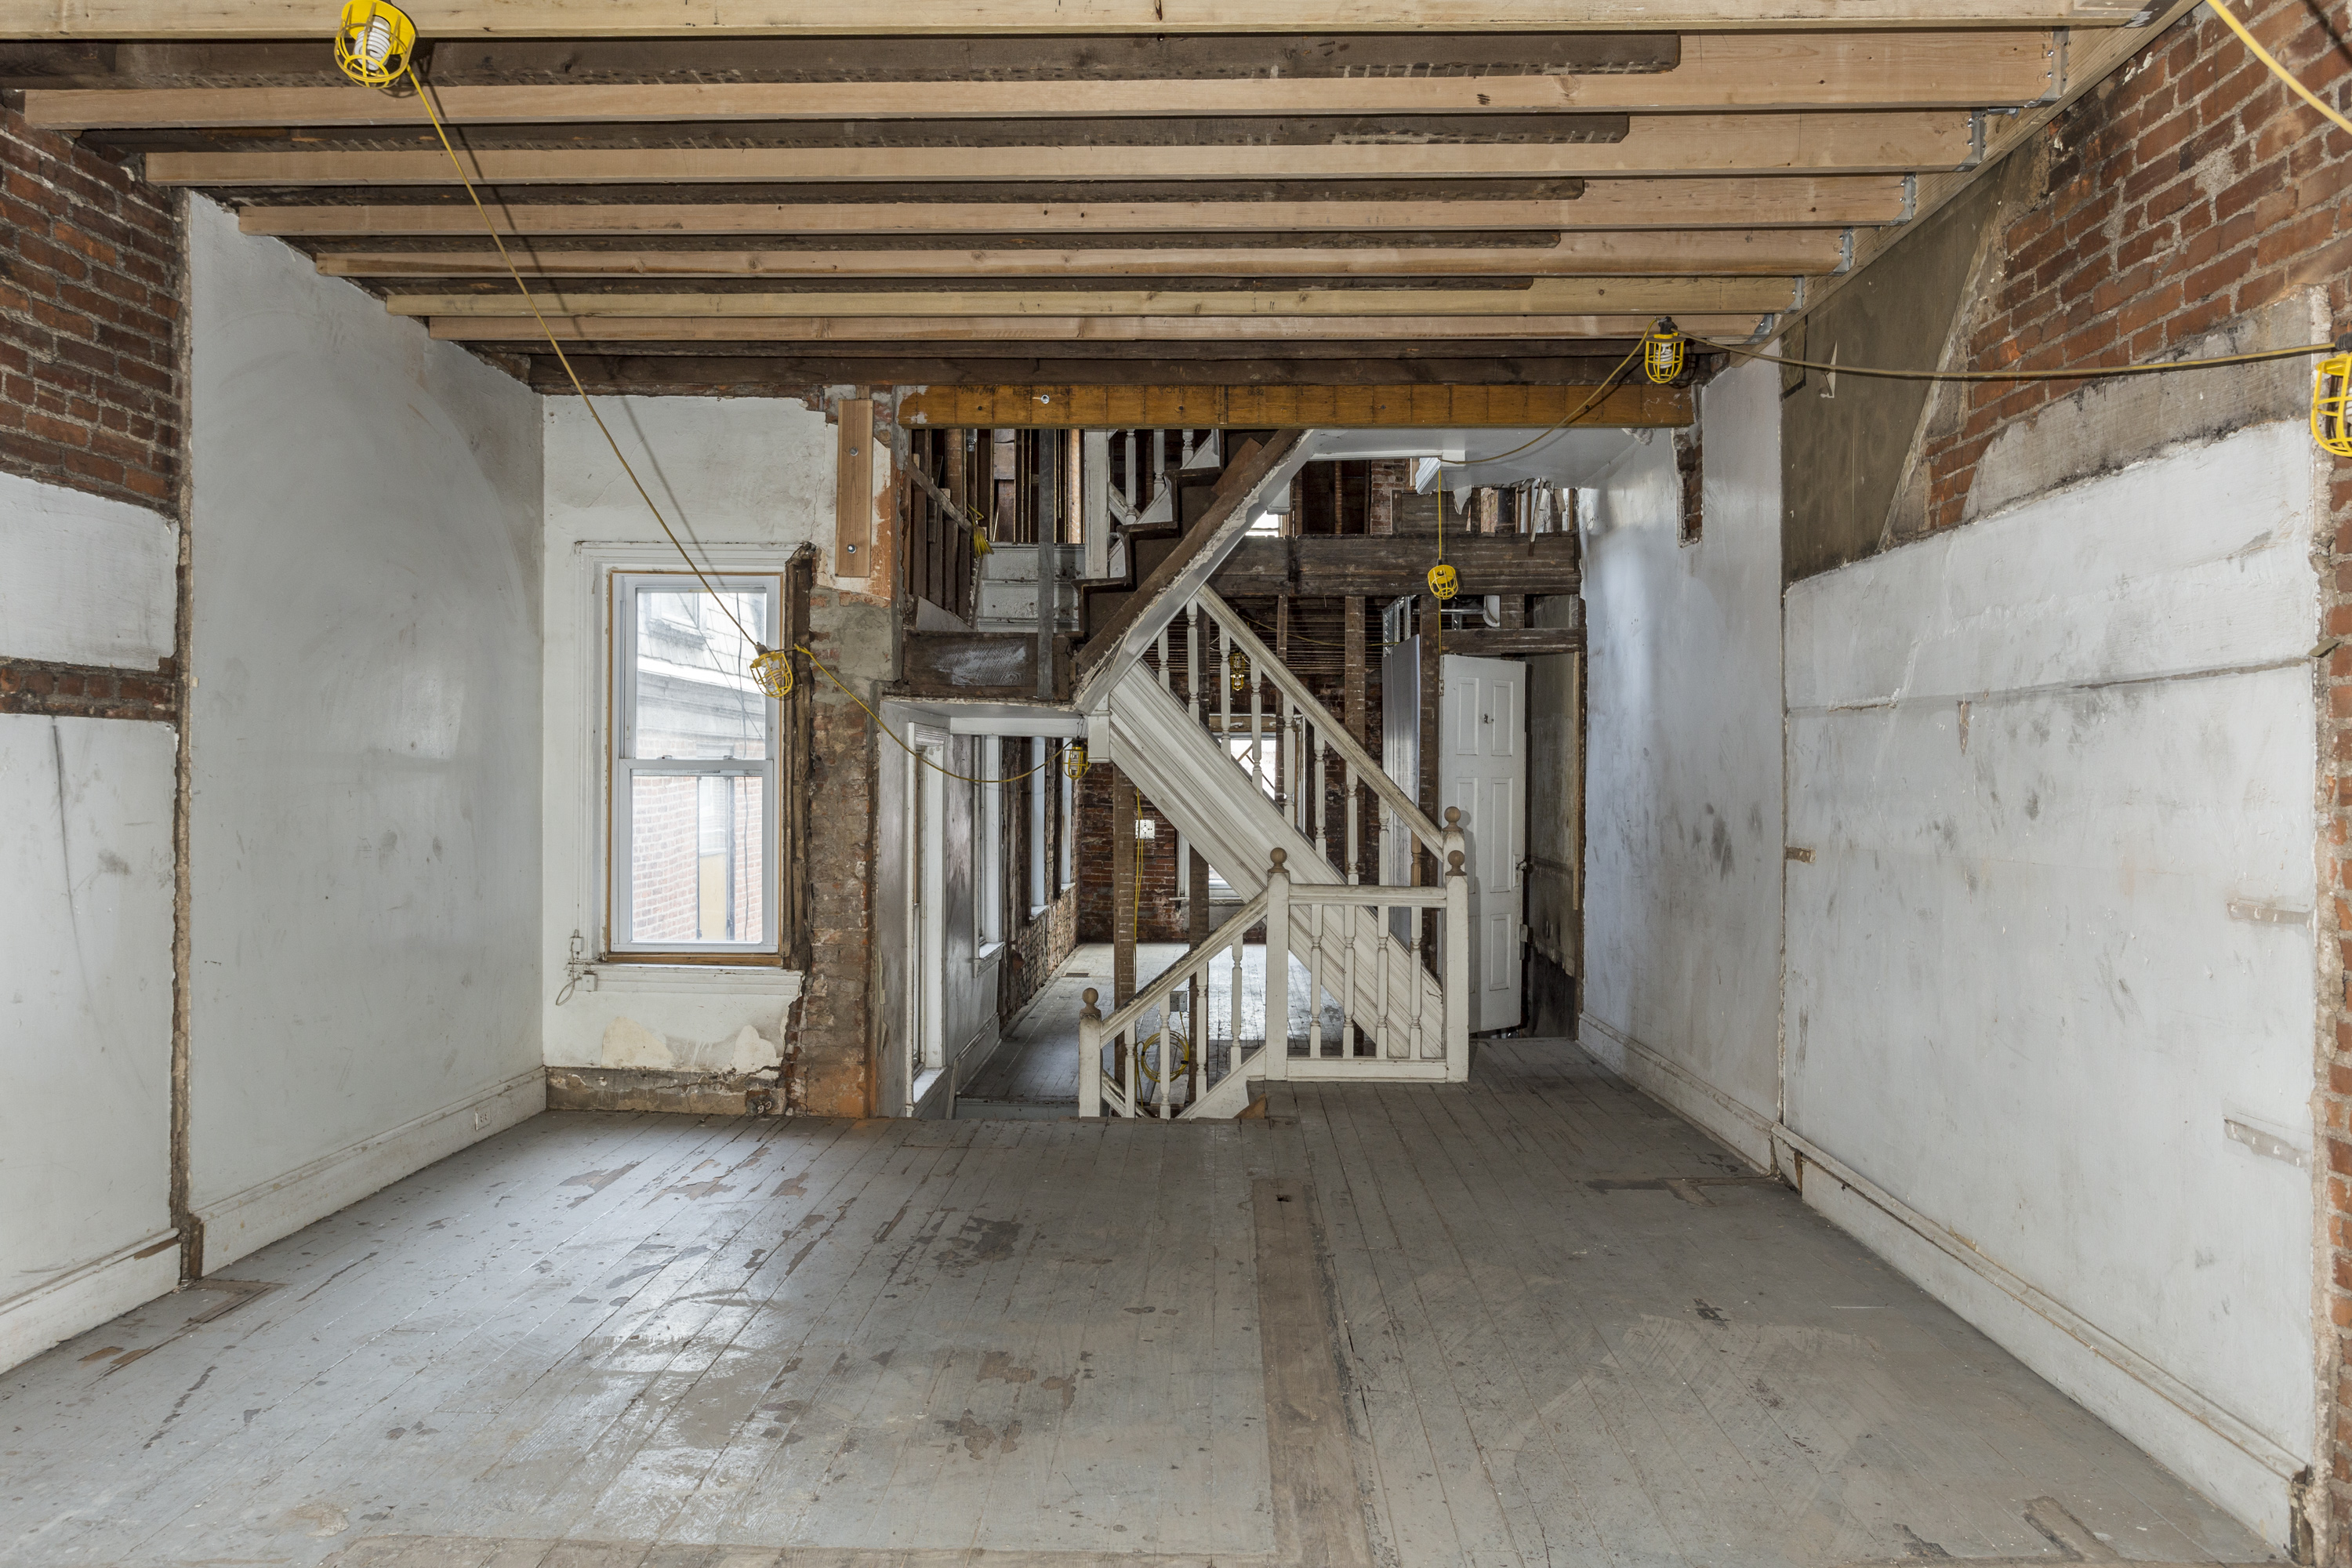 A completely gutted room with a staircase in the center.